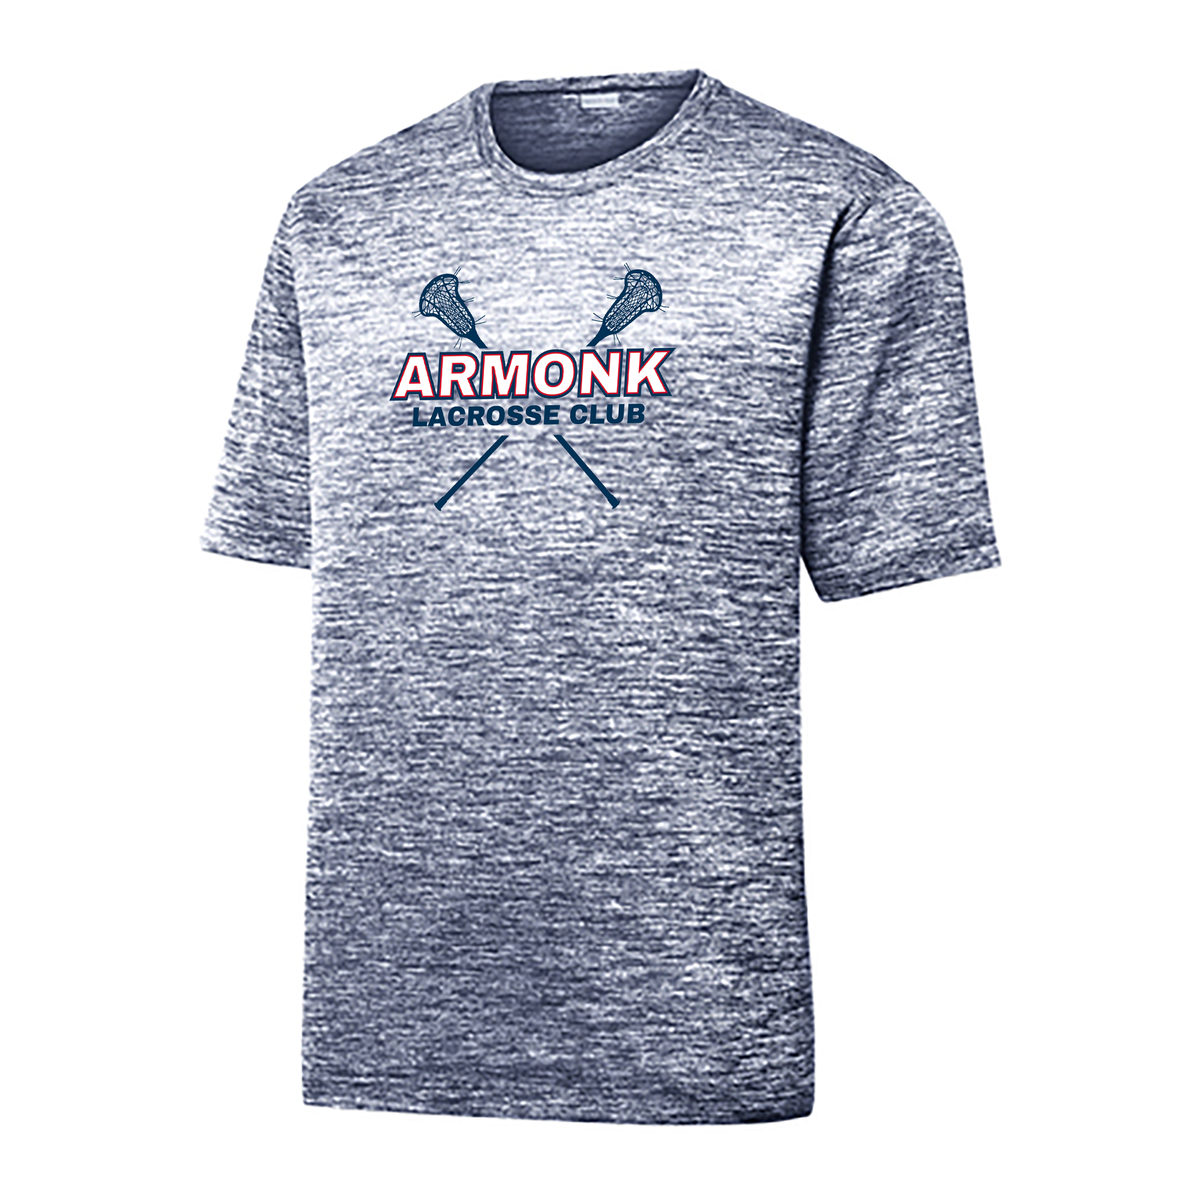 Armonk Lacrosse Club Electric Heather Tee (Youth & Adult)